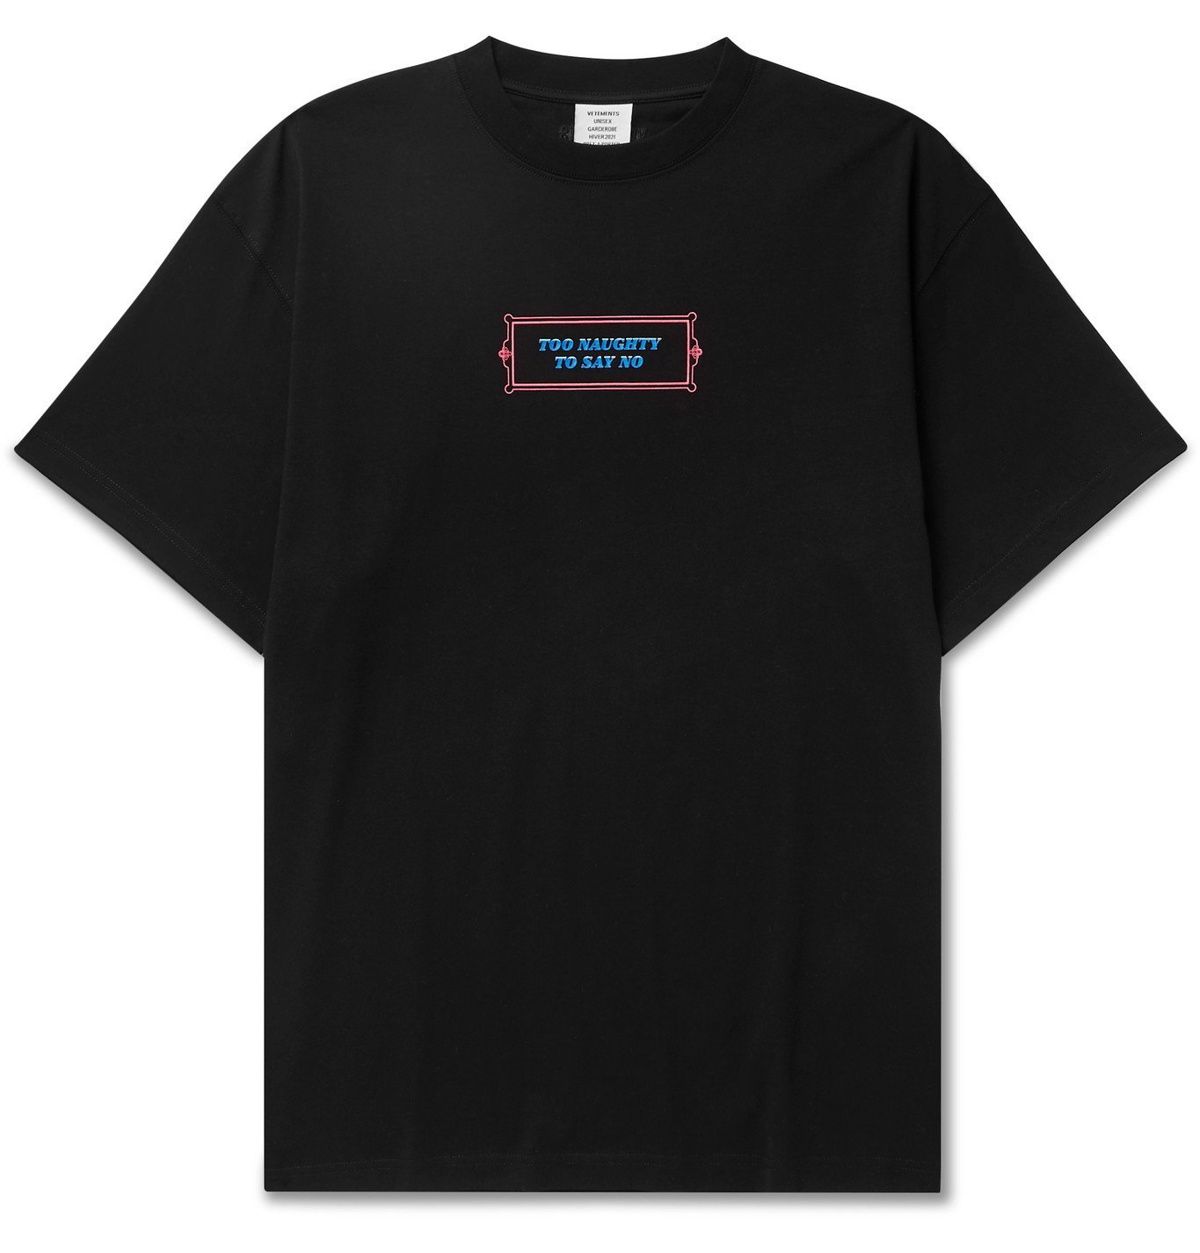 VETEMENTS Oversized Printed Distressed Cotton-Jersey T-Shirt for Men